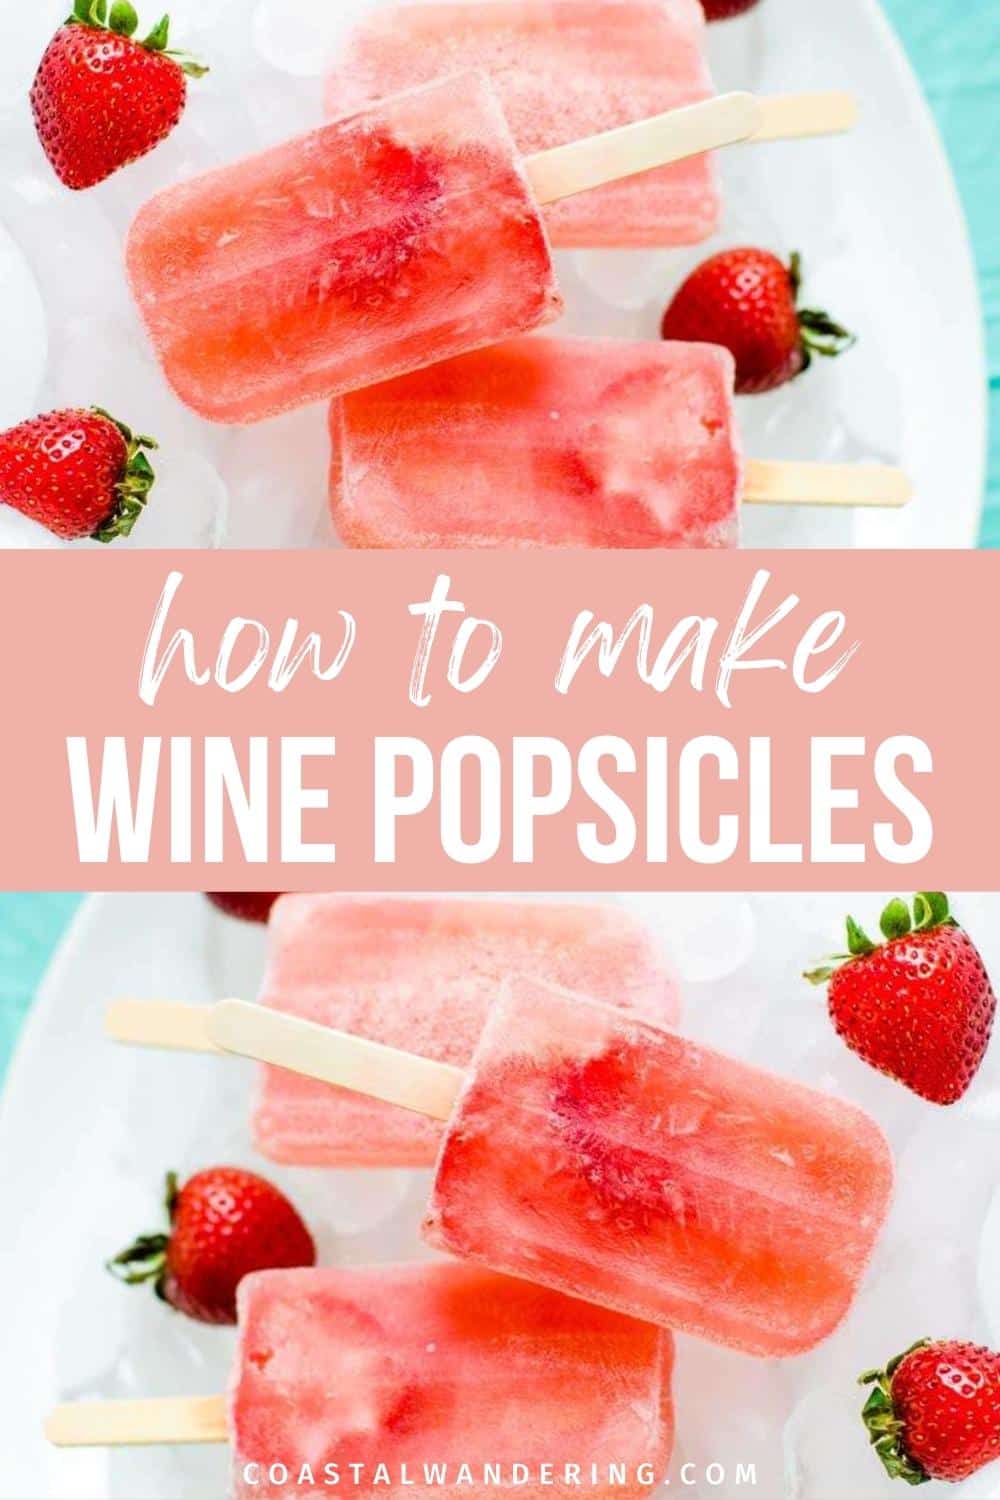 How to make wine popsicles